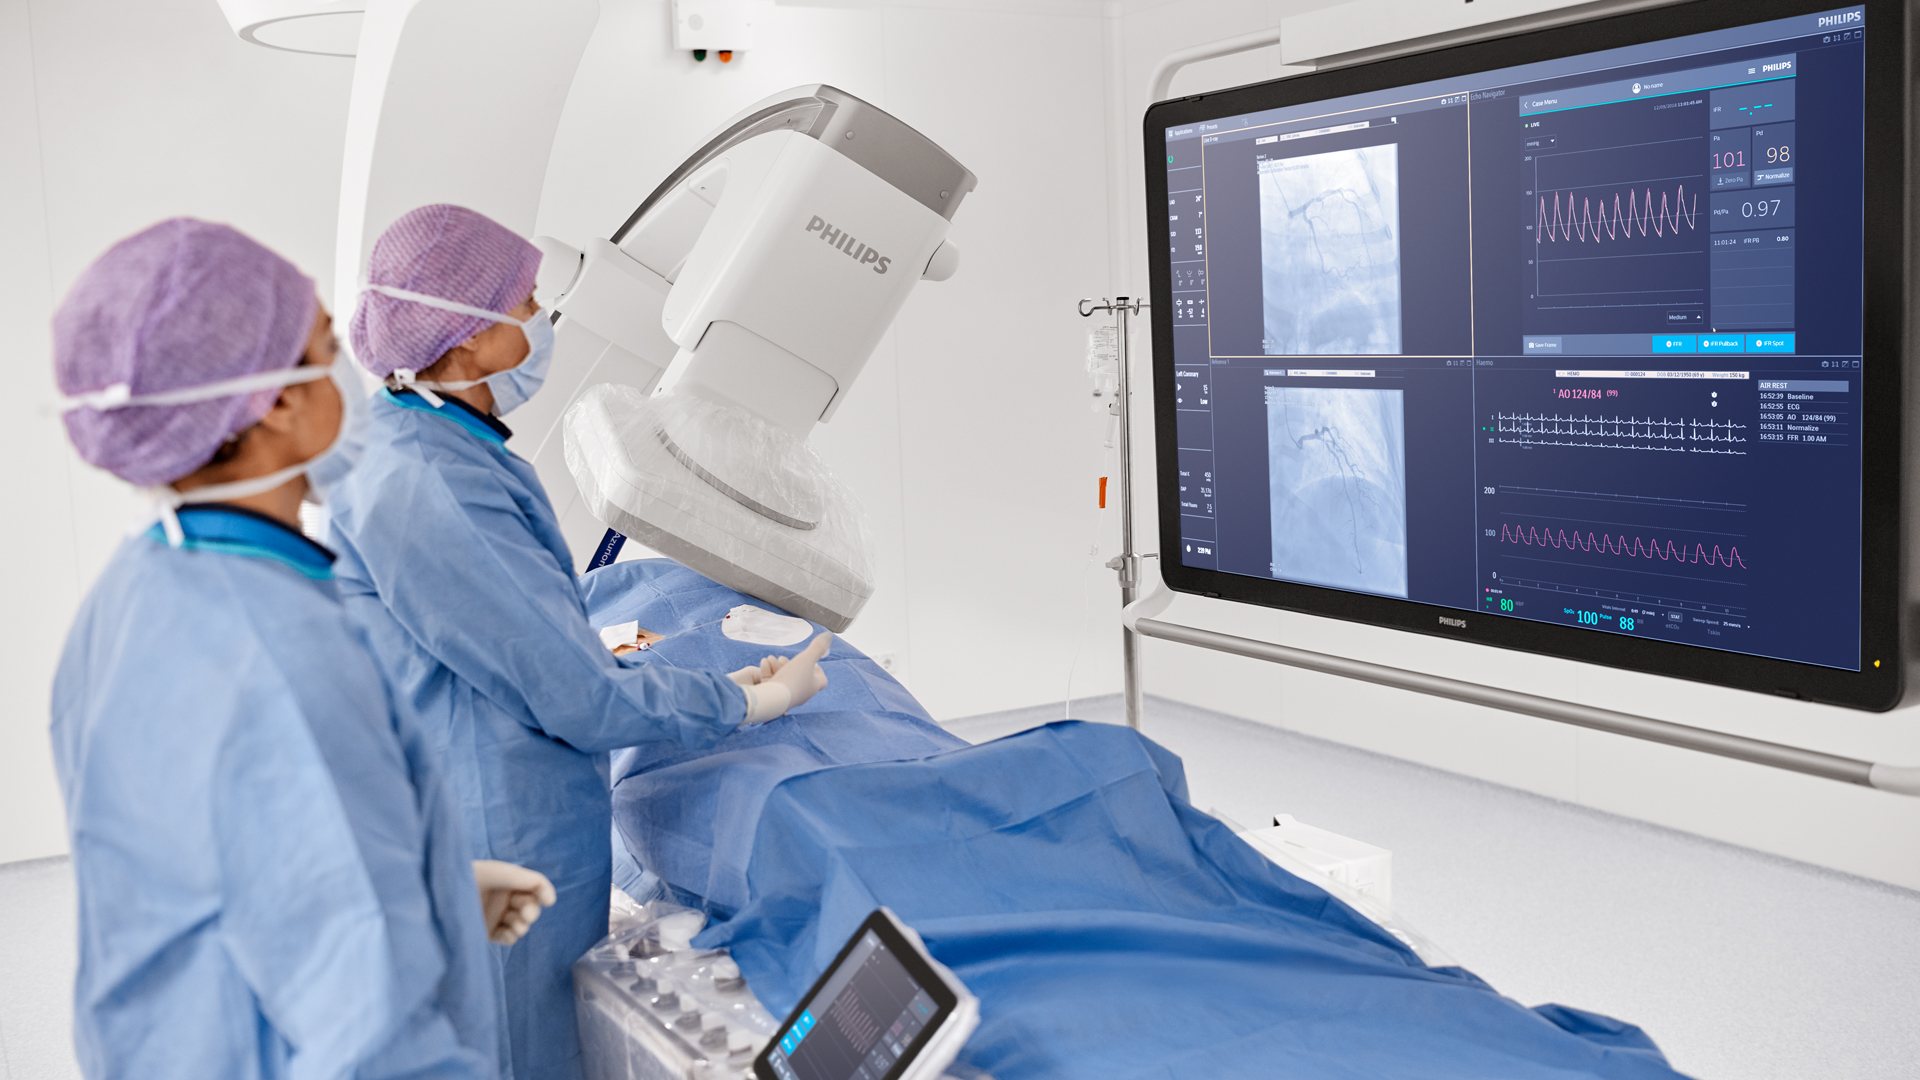 Philips’ latest Azurion image-guided therapy platform